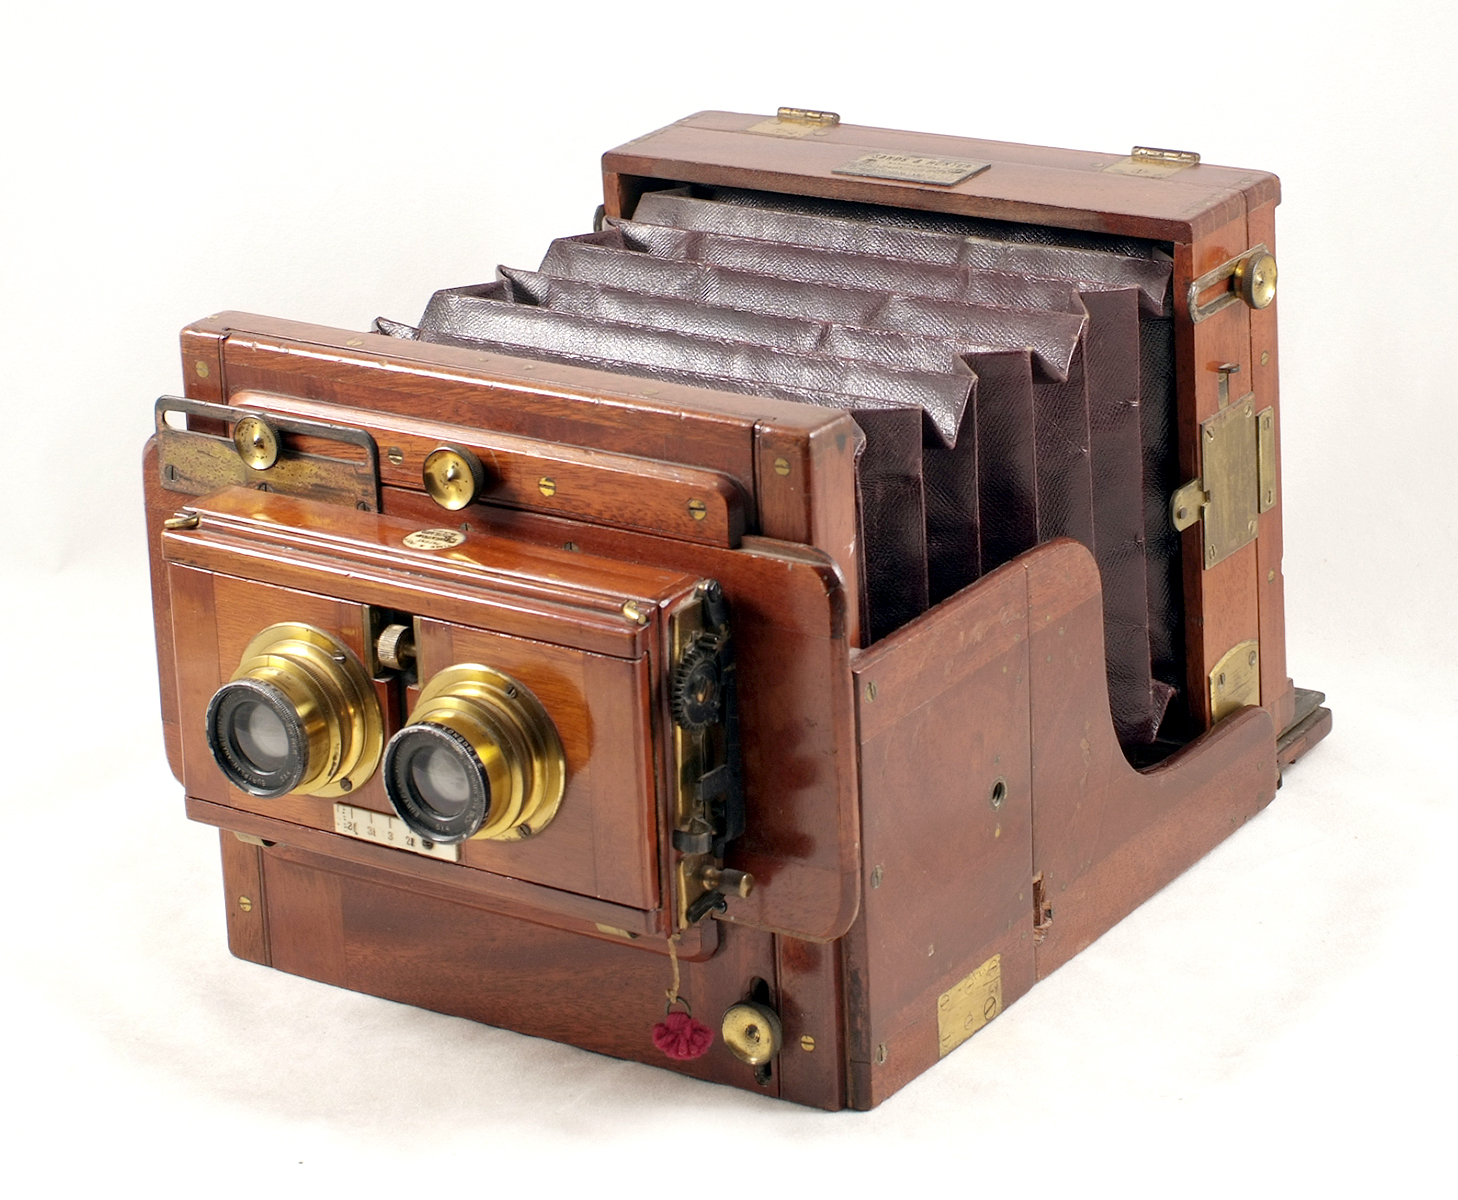 Sands Hunter Half Plate Stereo Tailboard Camera - Image 2 of 5